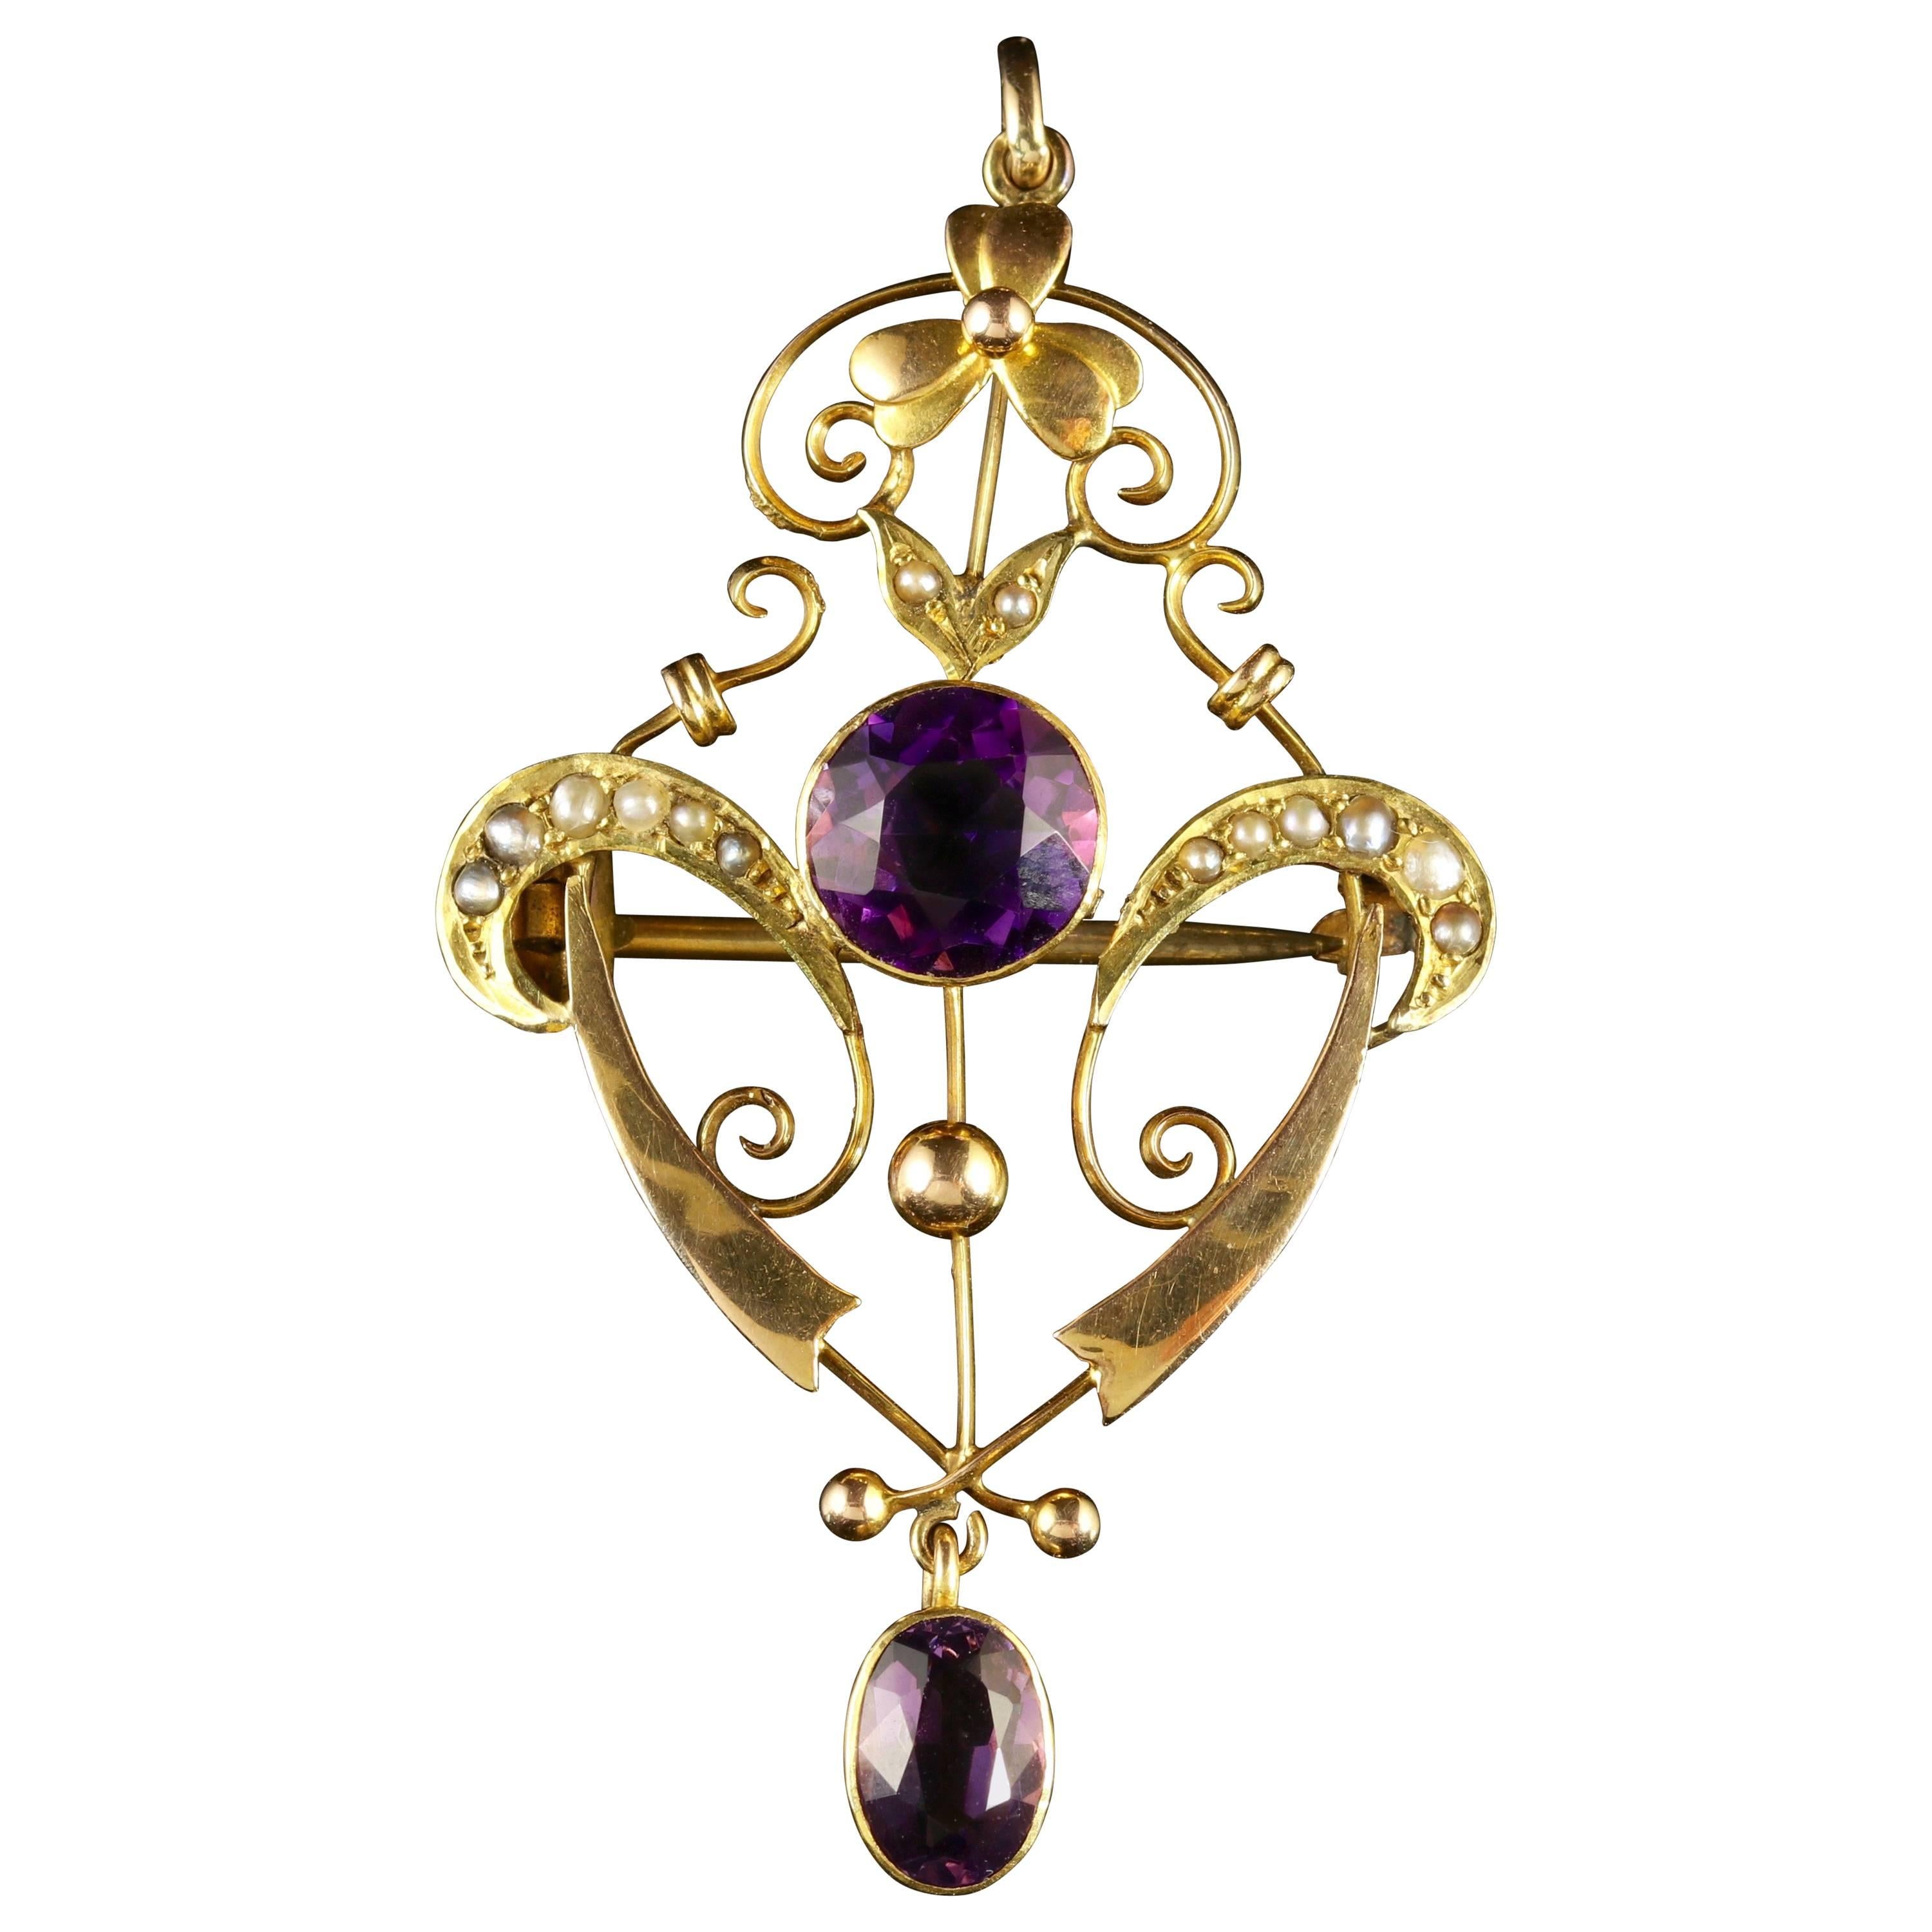 Antique Amethyst Pearl Gold Pendant Brooch, circa 1880 For Sale